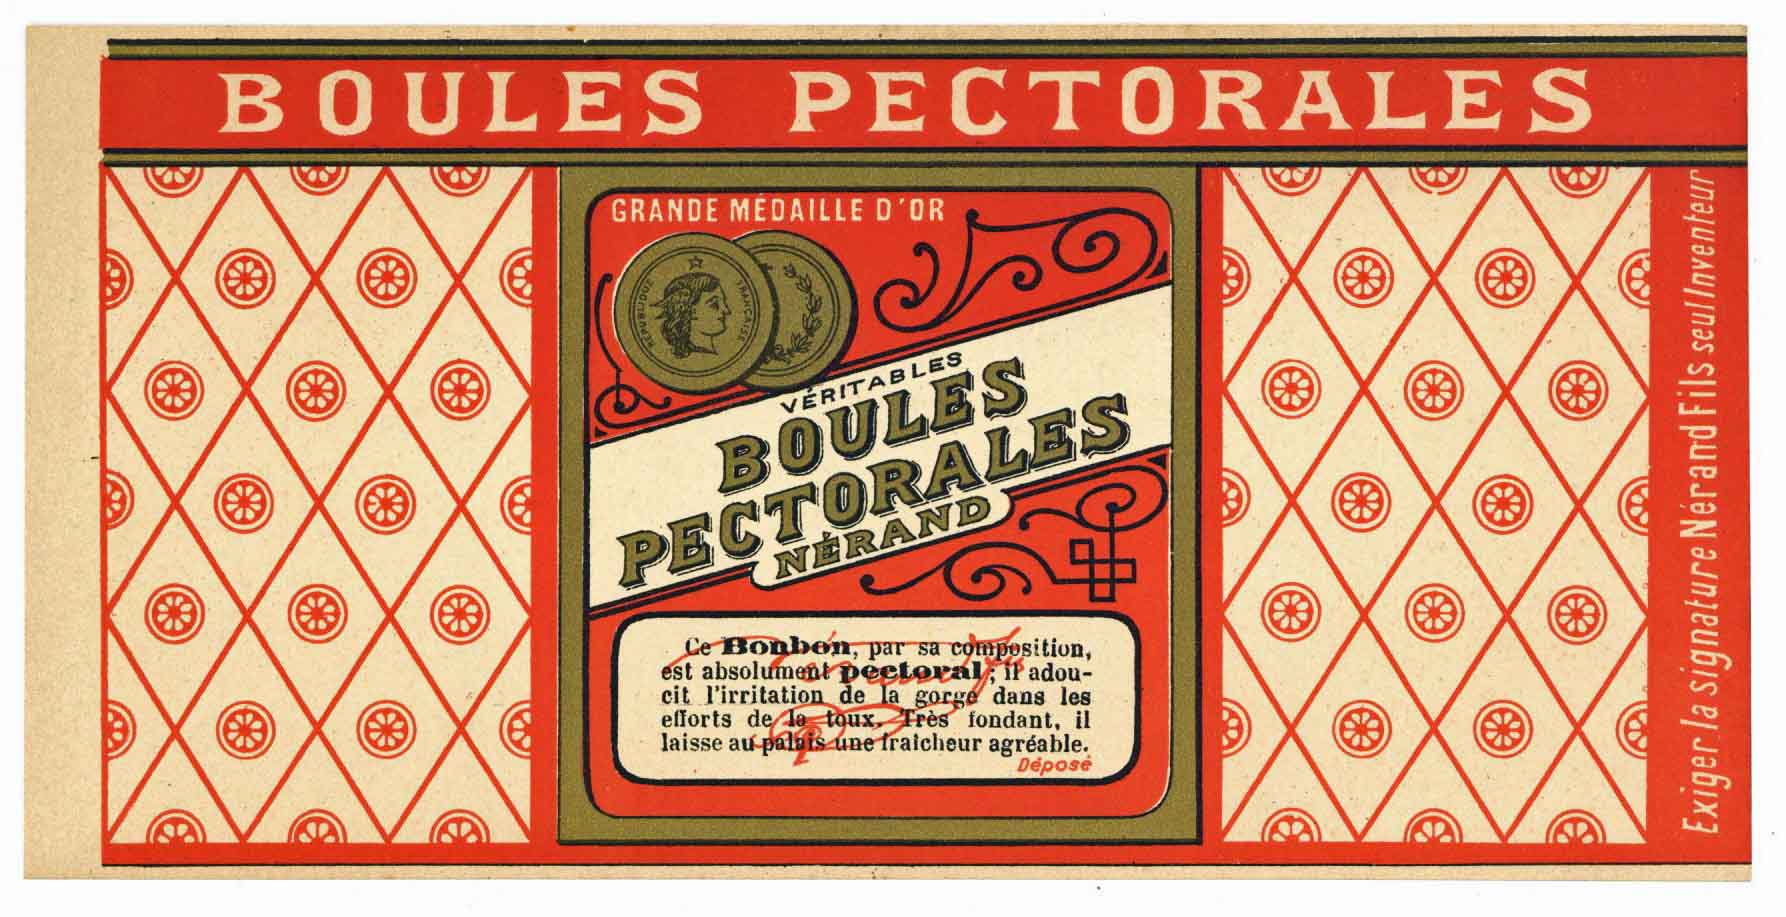 Boules Pectorales Brand Vintage French Candy Can Label